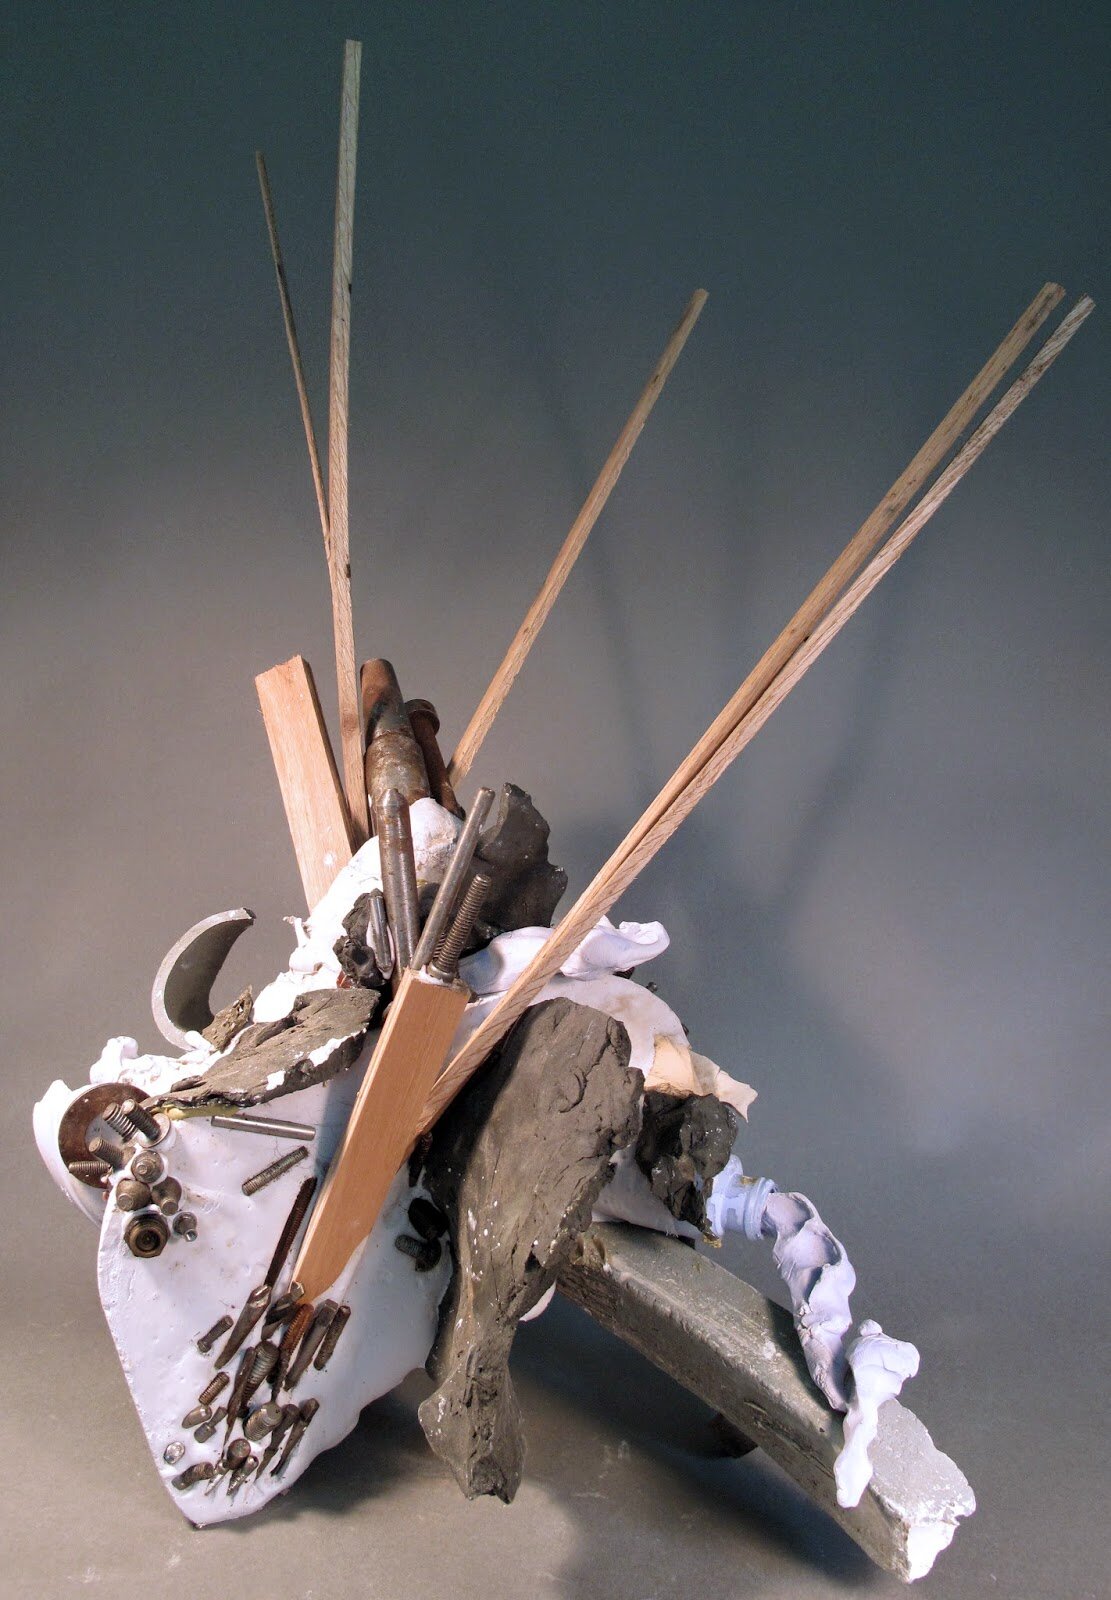  Sara Fine-Wilson,  From the Core,  Clay, Plaster, Metal, Found Objects, Silicone, 24x16x12 